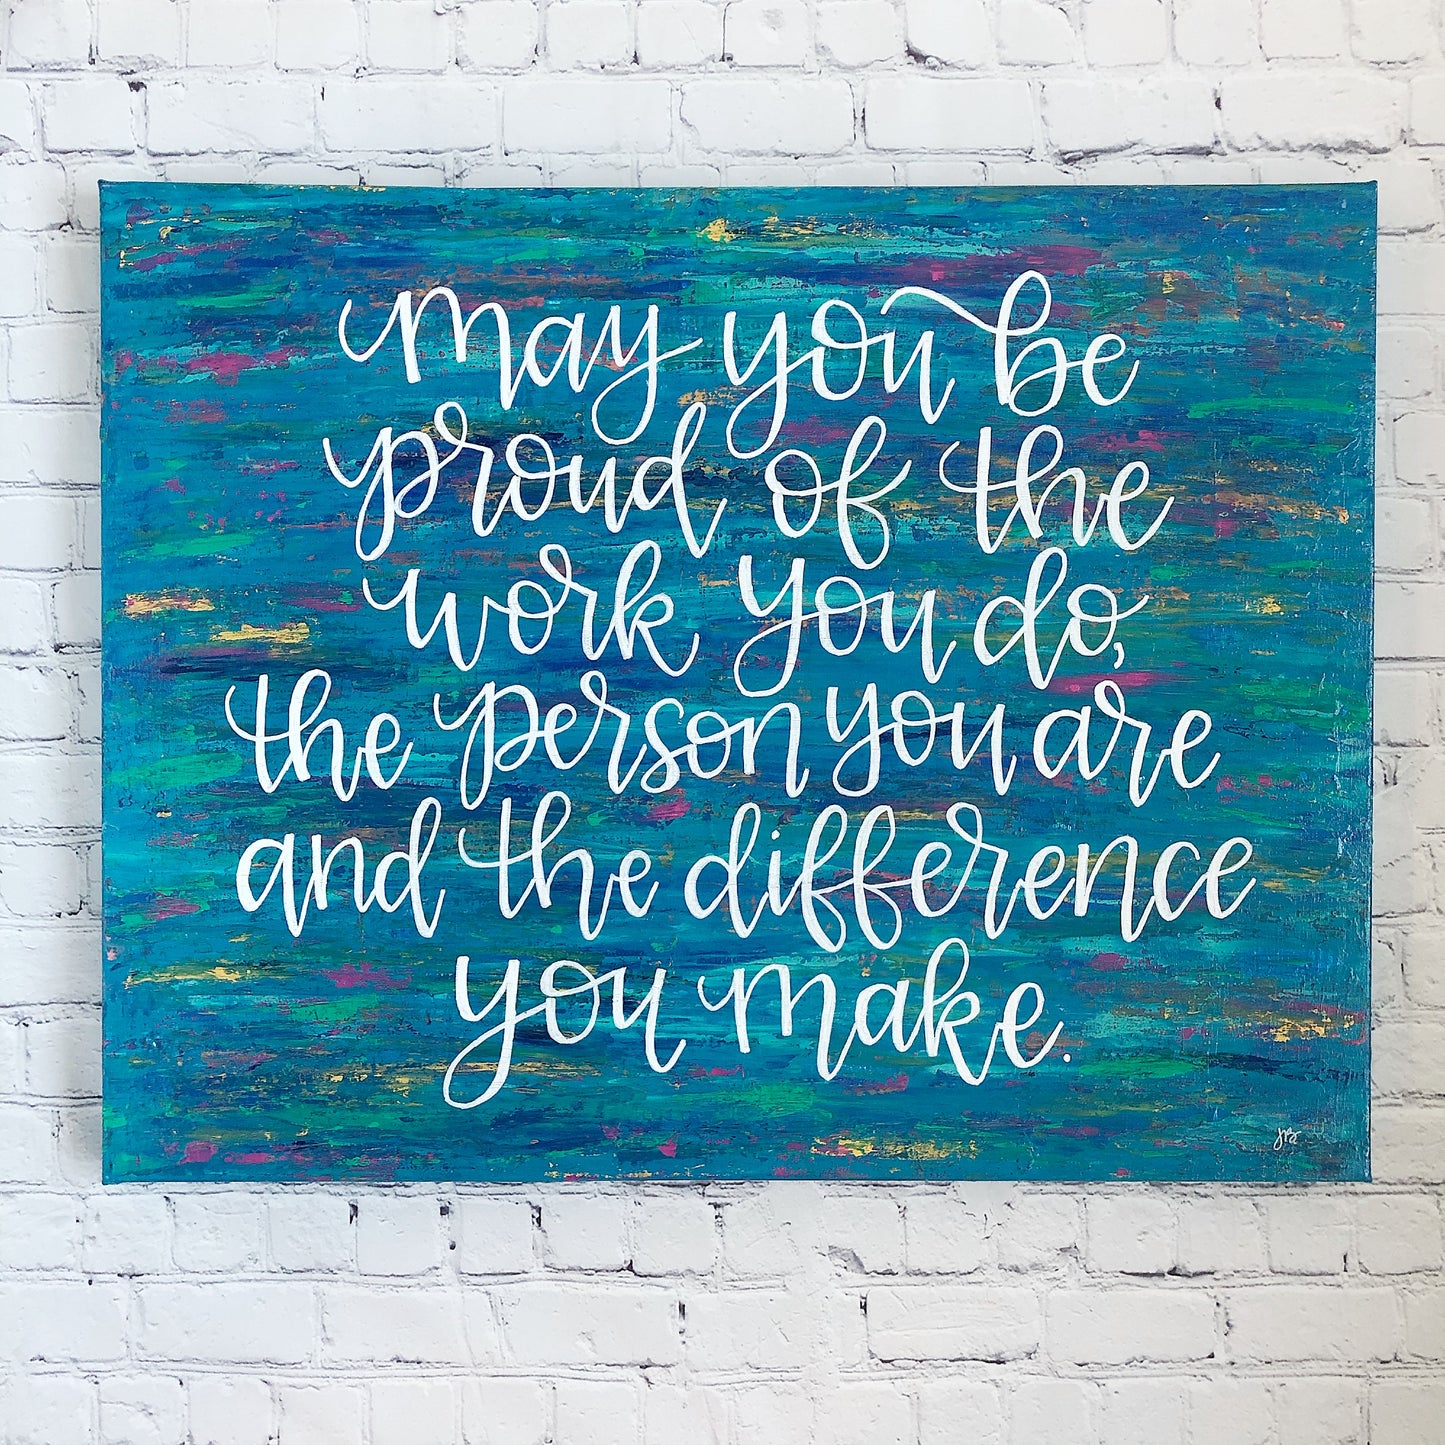 The Difference You Make | 22"x28" Calligraphy on Abstract